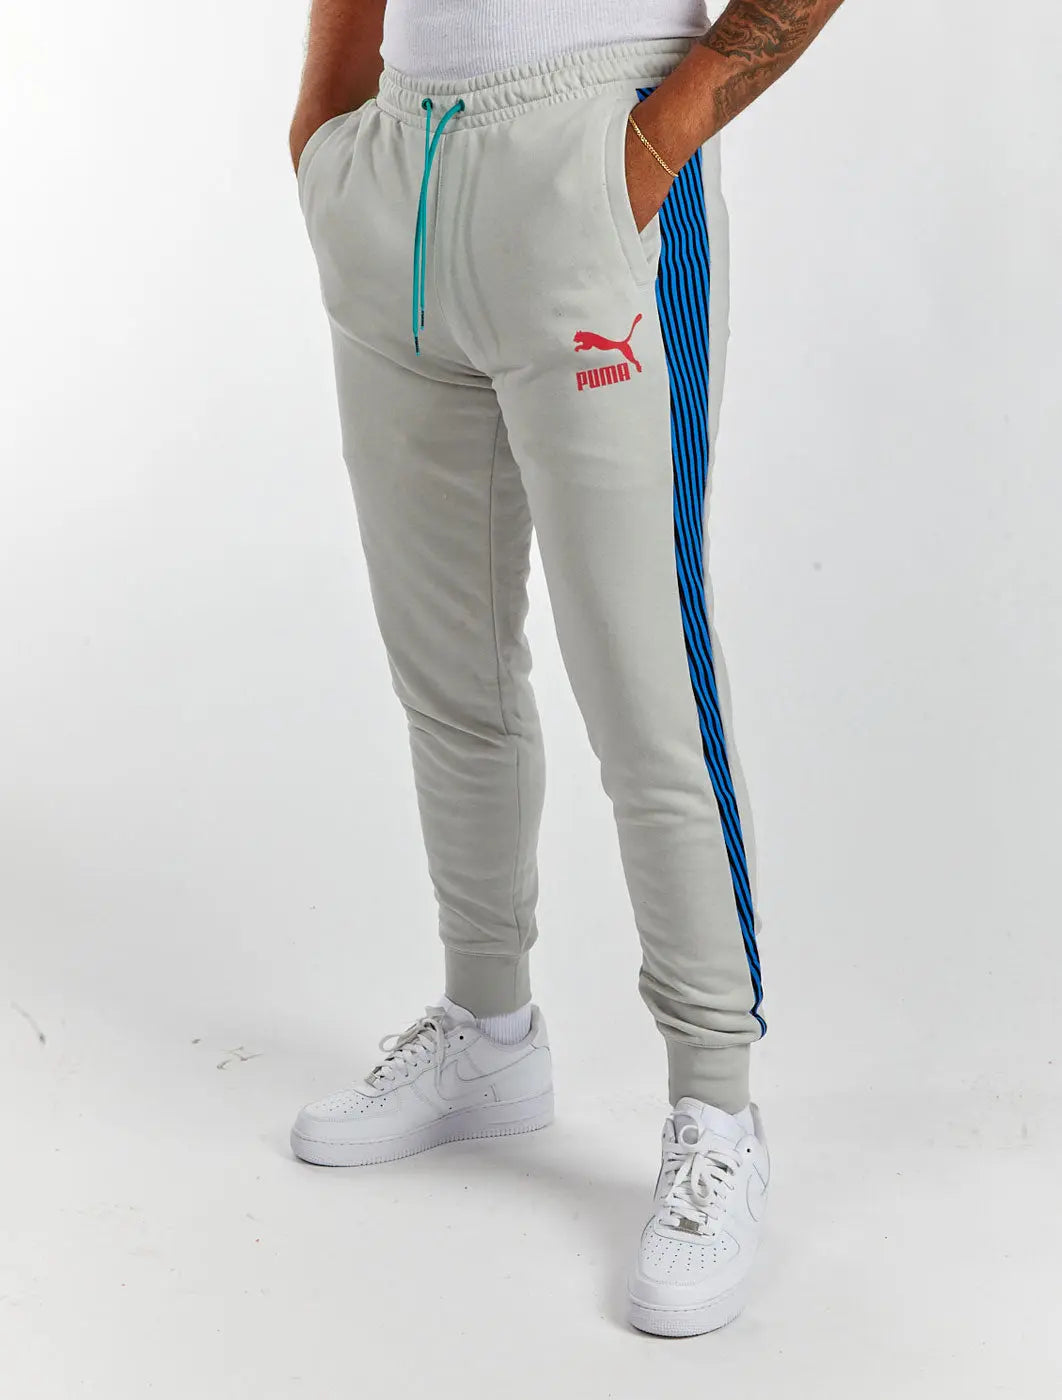 Follow @hoodstore now for the best denim track pants and more! Order now  online : www.hoodstore.com | Roupas masculinas, Moda masculina, Roupas